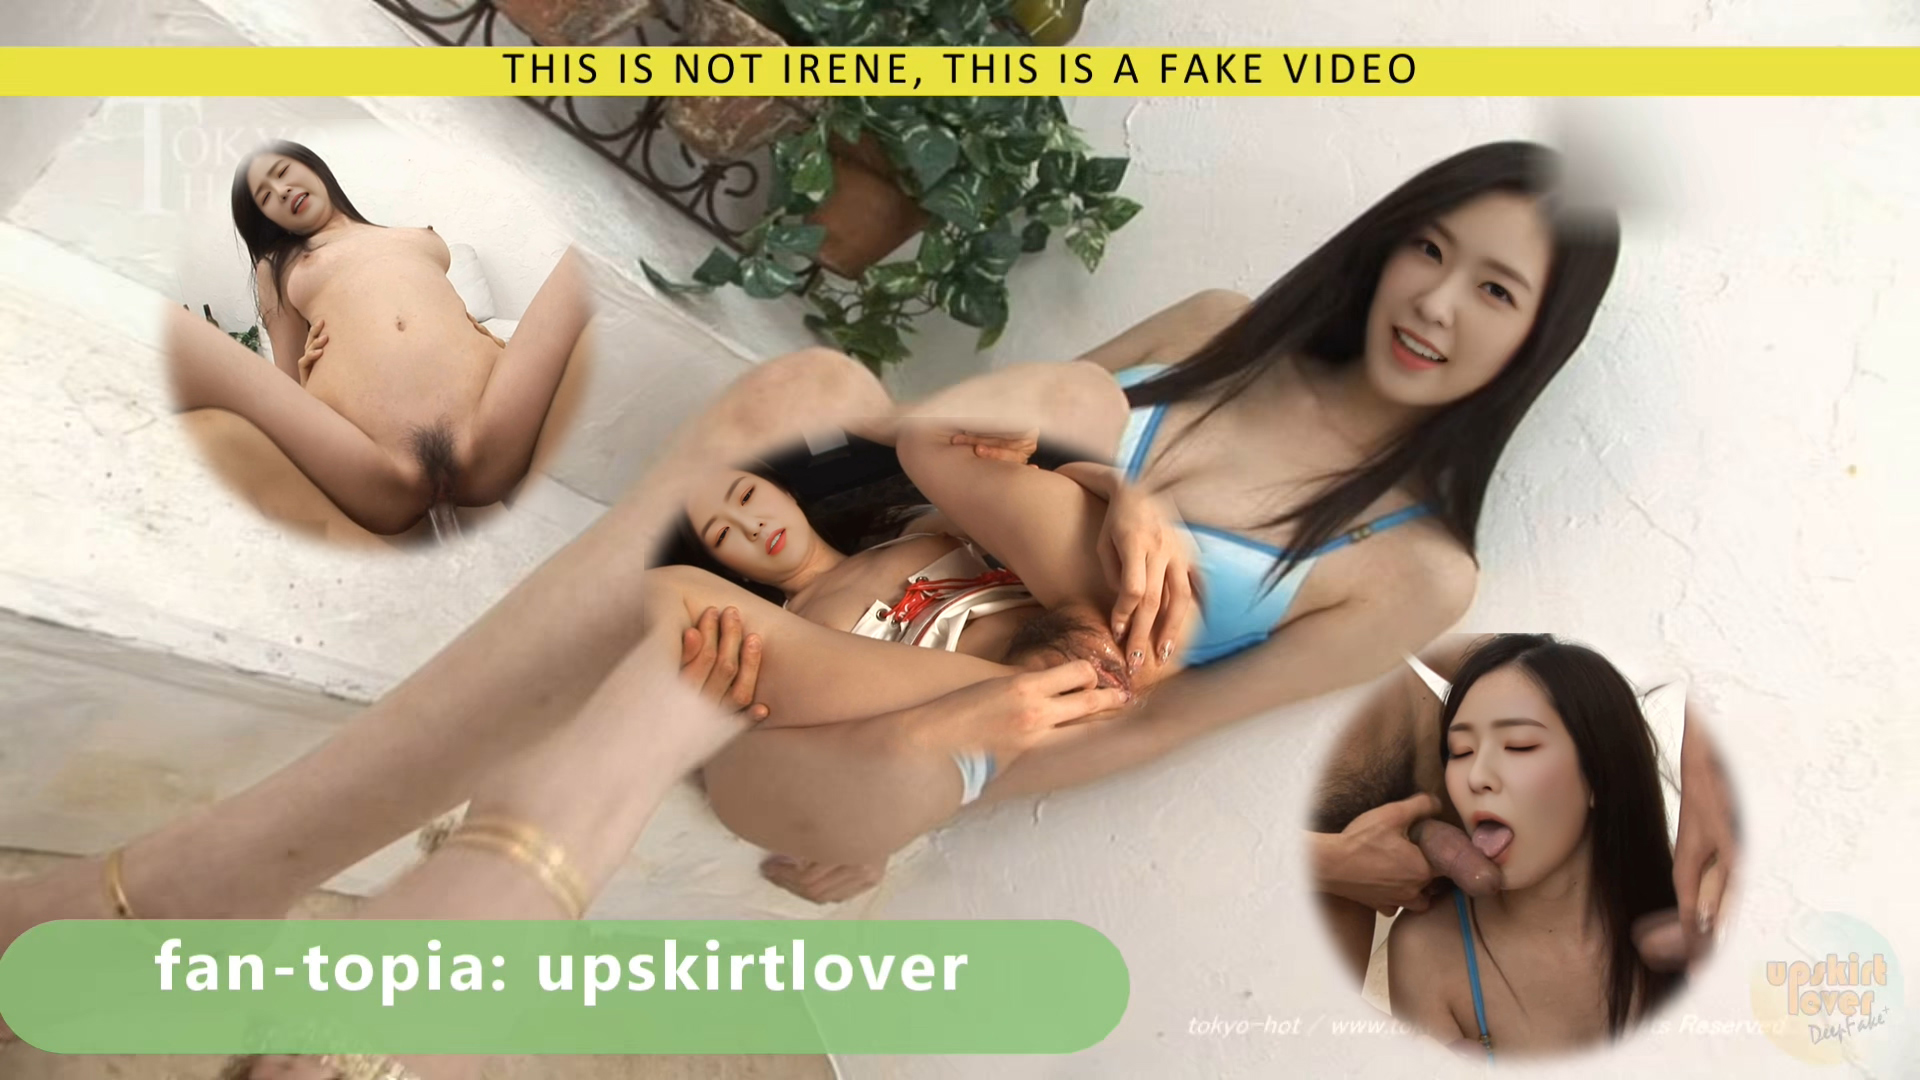 This is not IRENE (4) - TOKYO HOT preview (full video: 17:02)